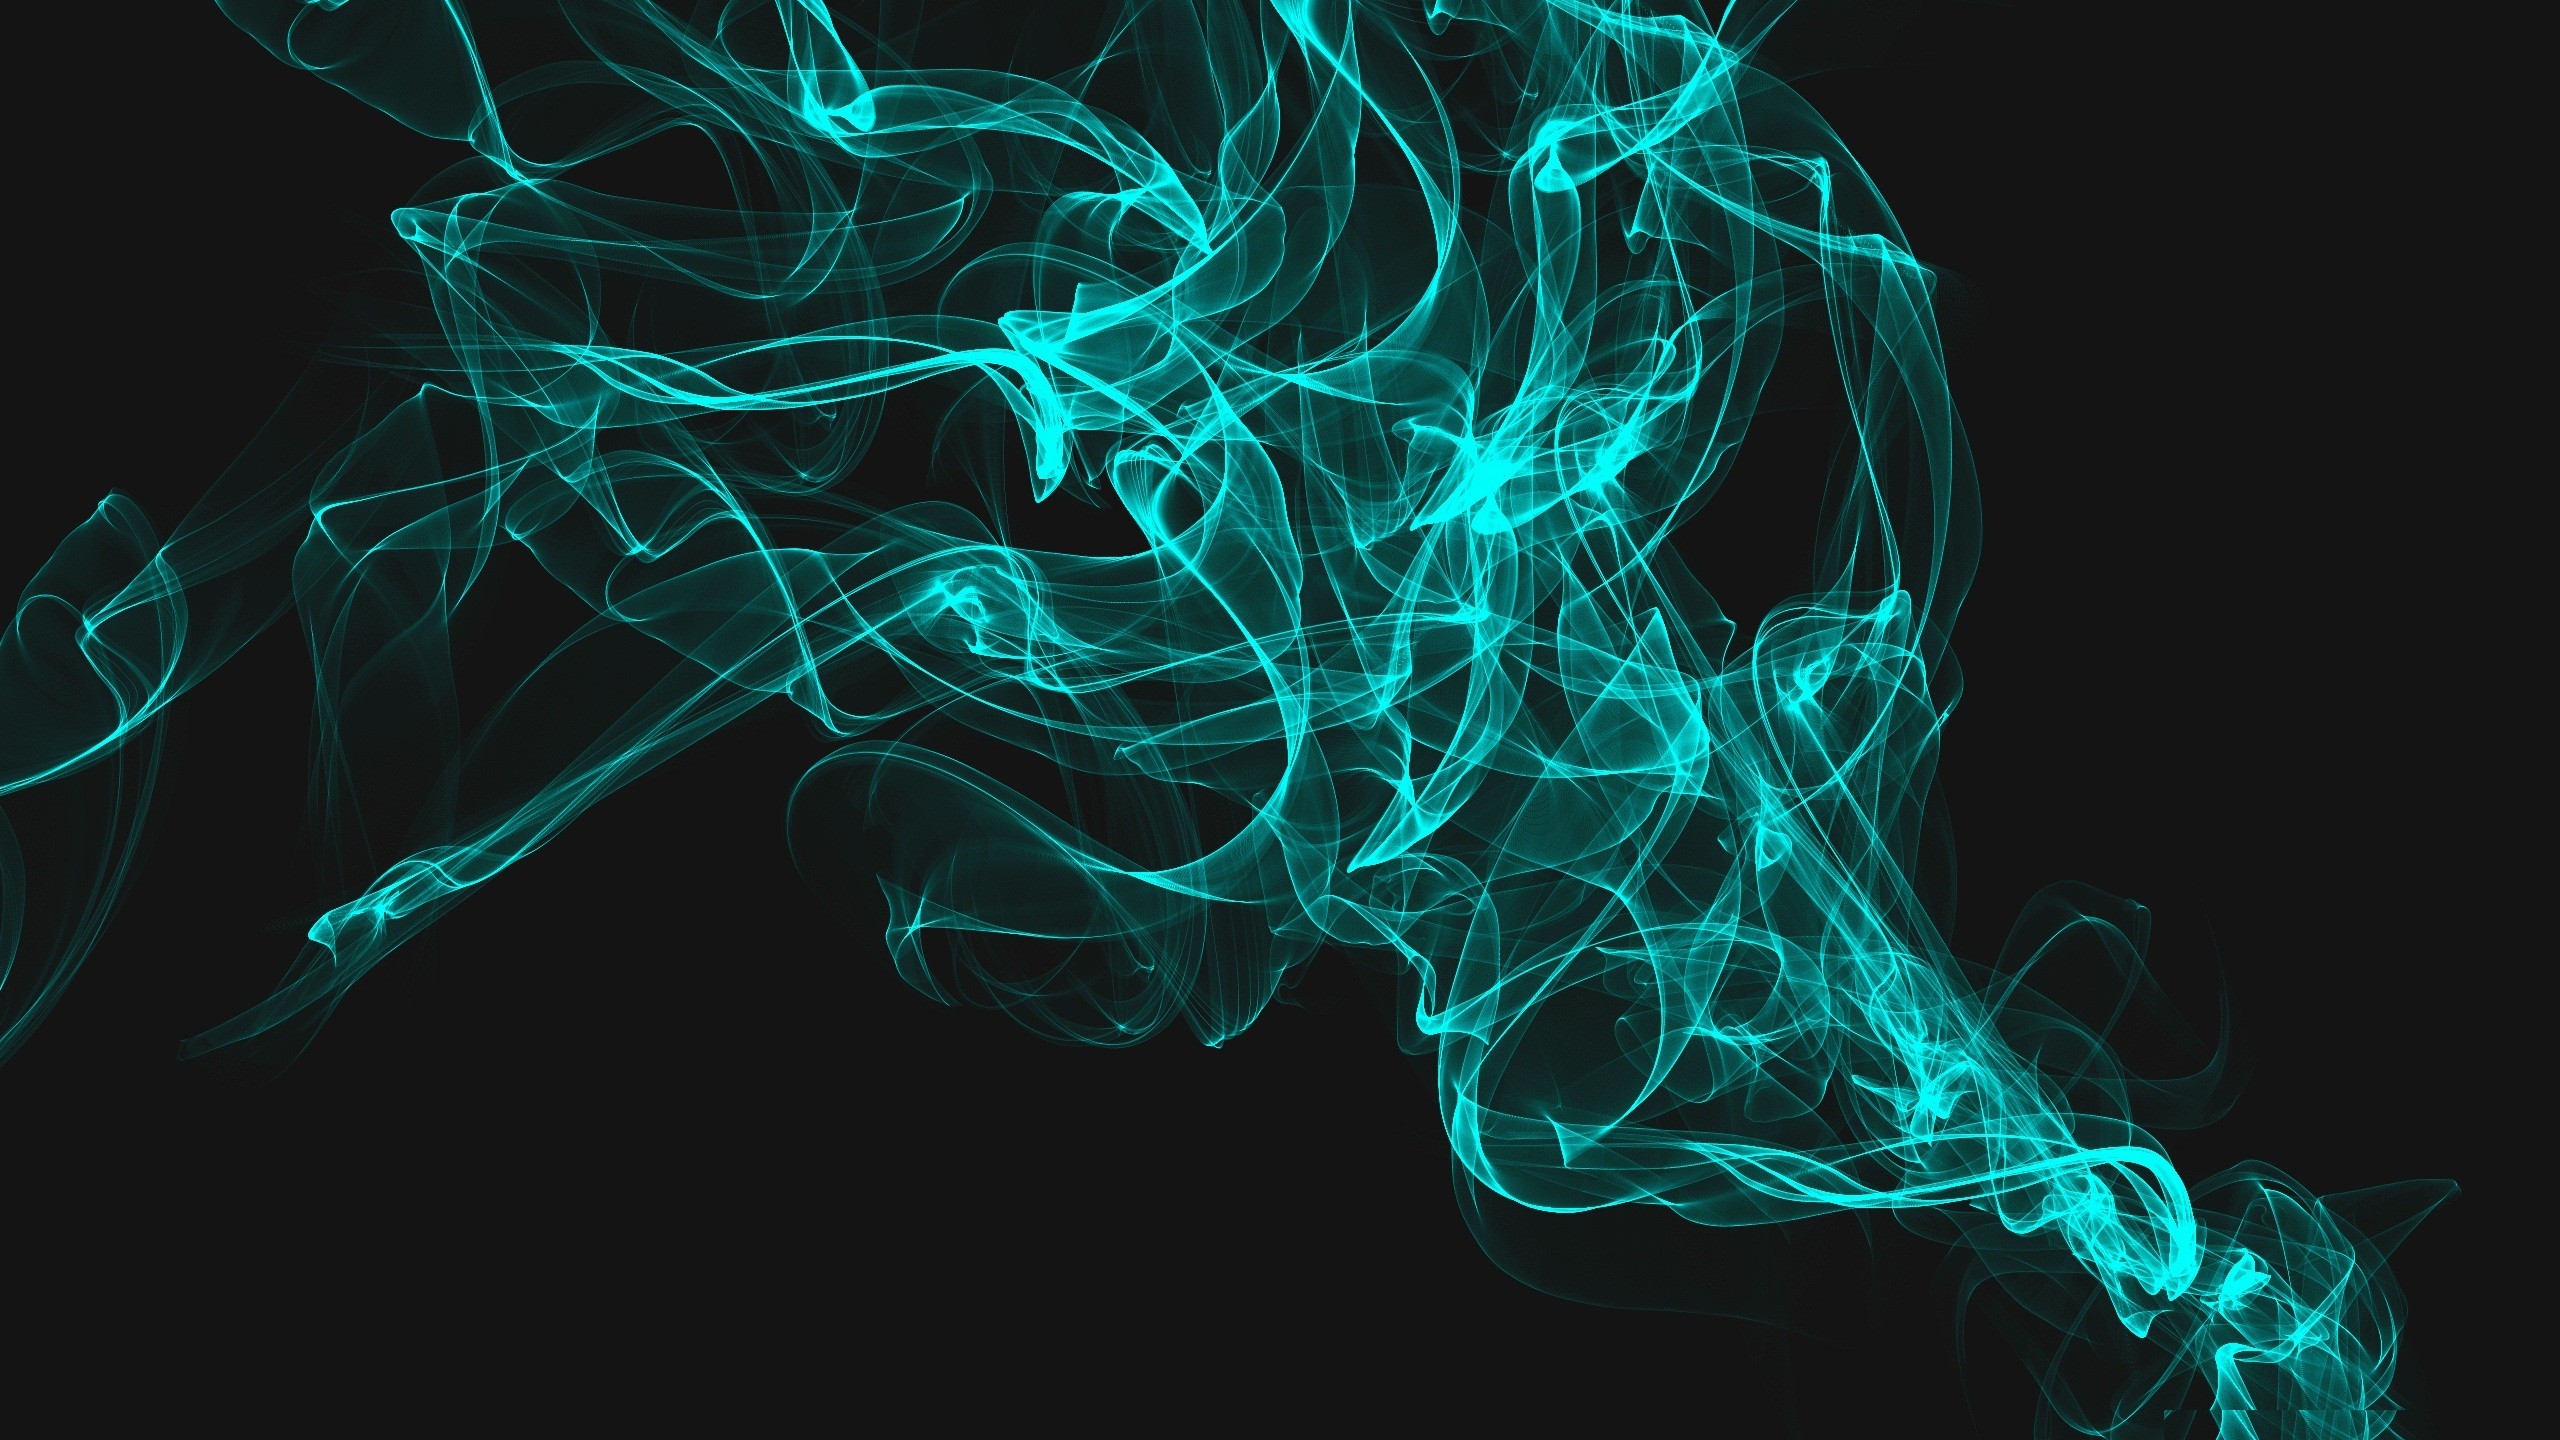  nobody abstract other abstract 2560x1440 13 jan 2014 calimero 2560x1440